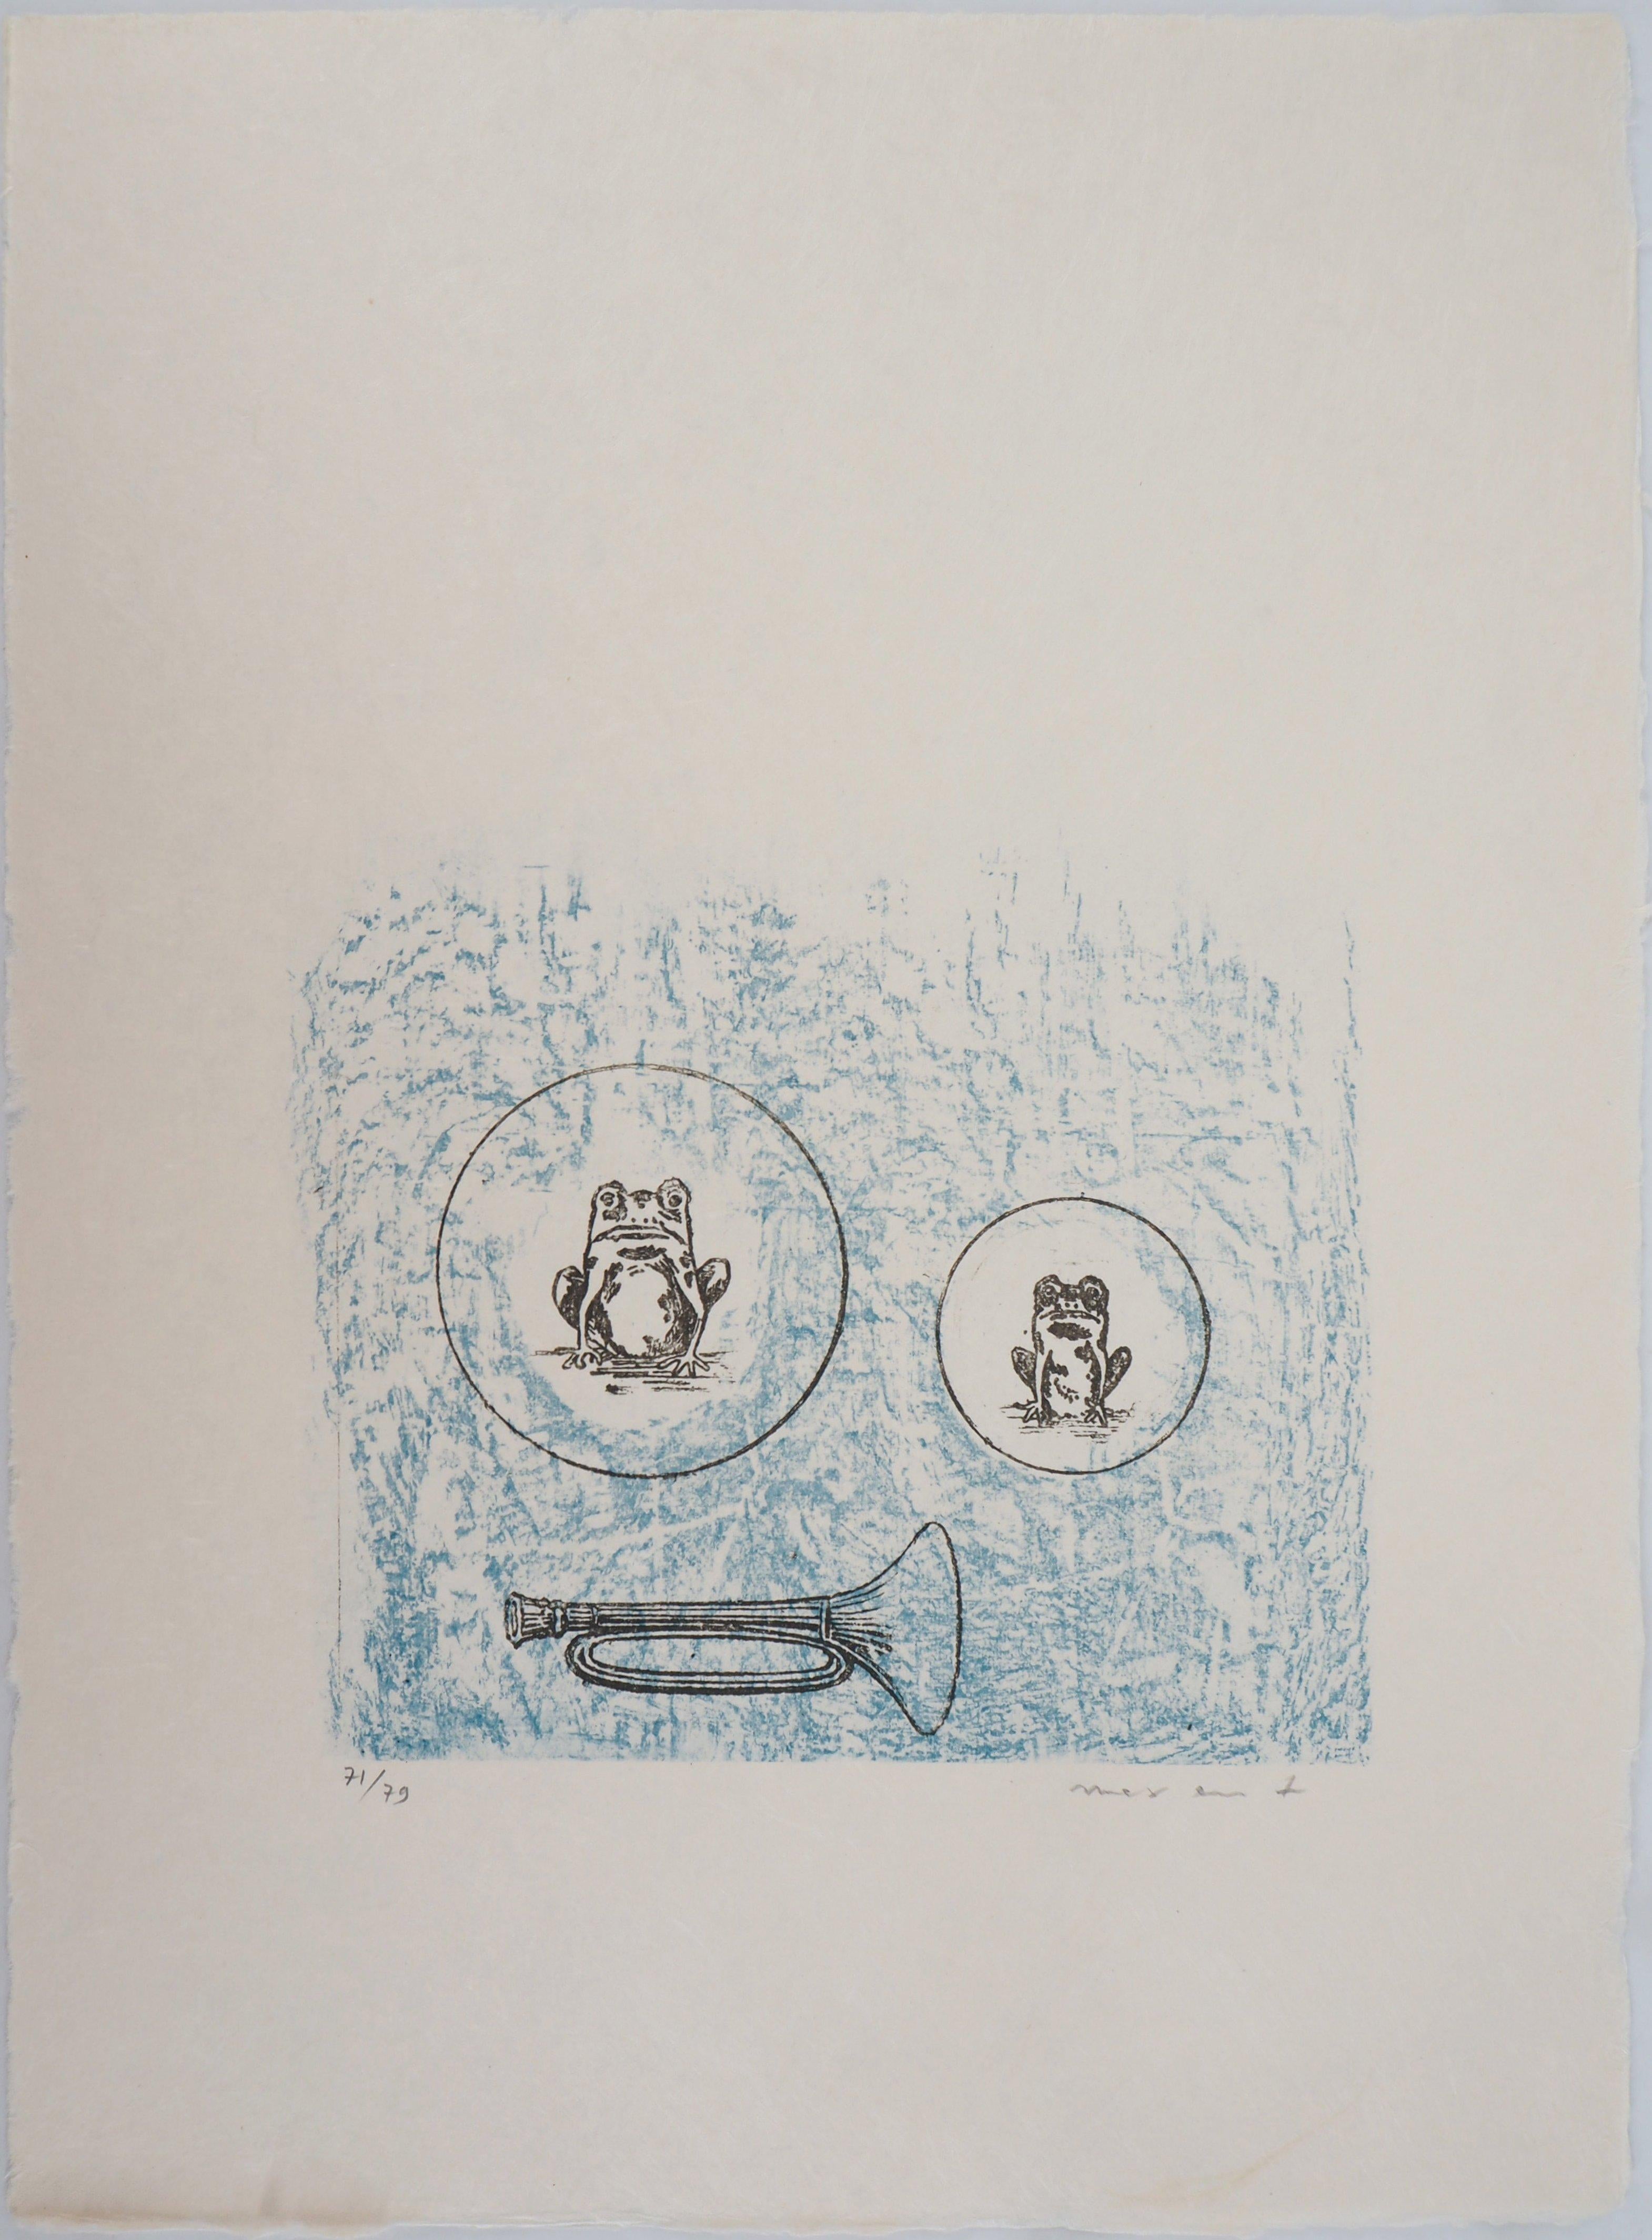 Two Frogs - Original Lithograph Handsigned and limited 79 copies - Mourlot 1972 - Print by Max Ernst